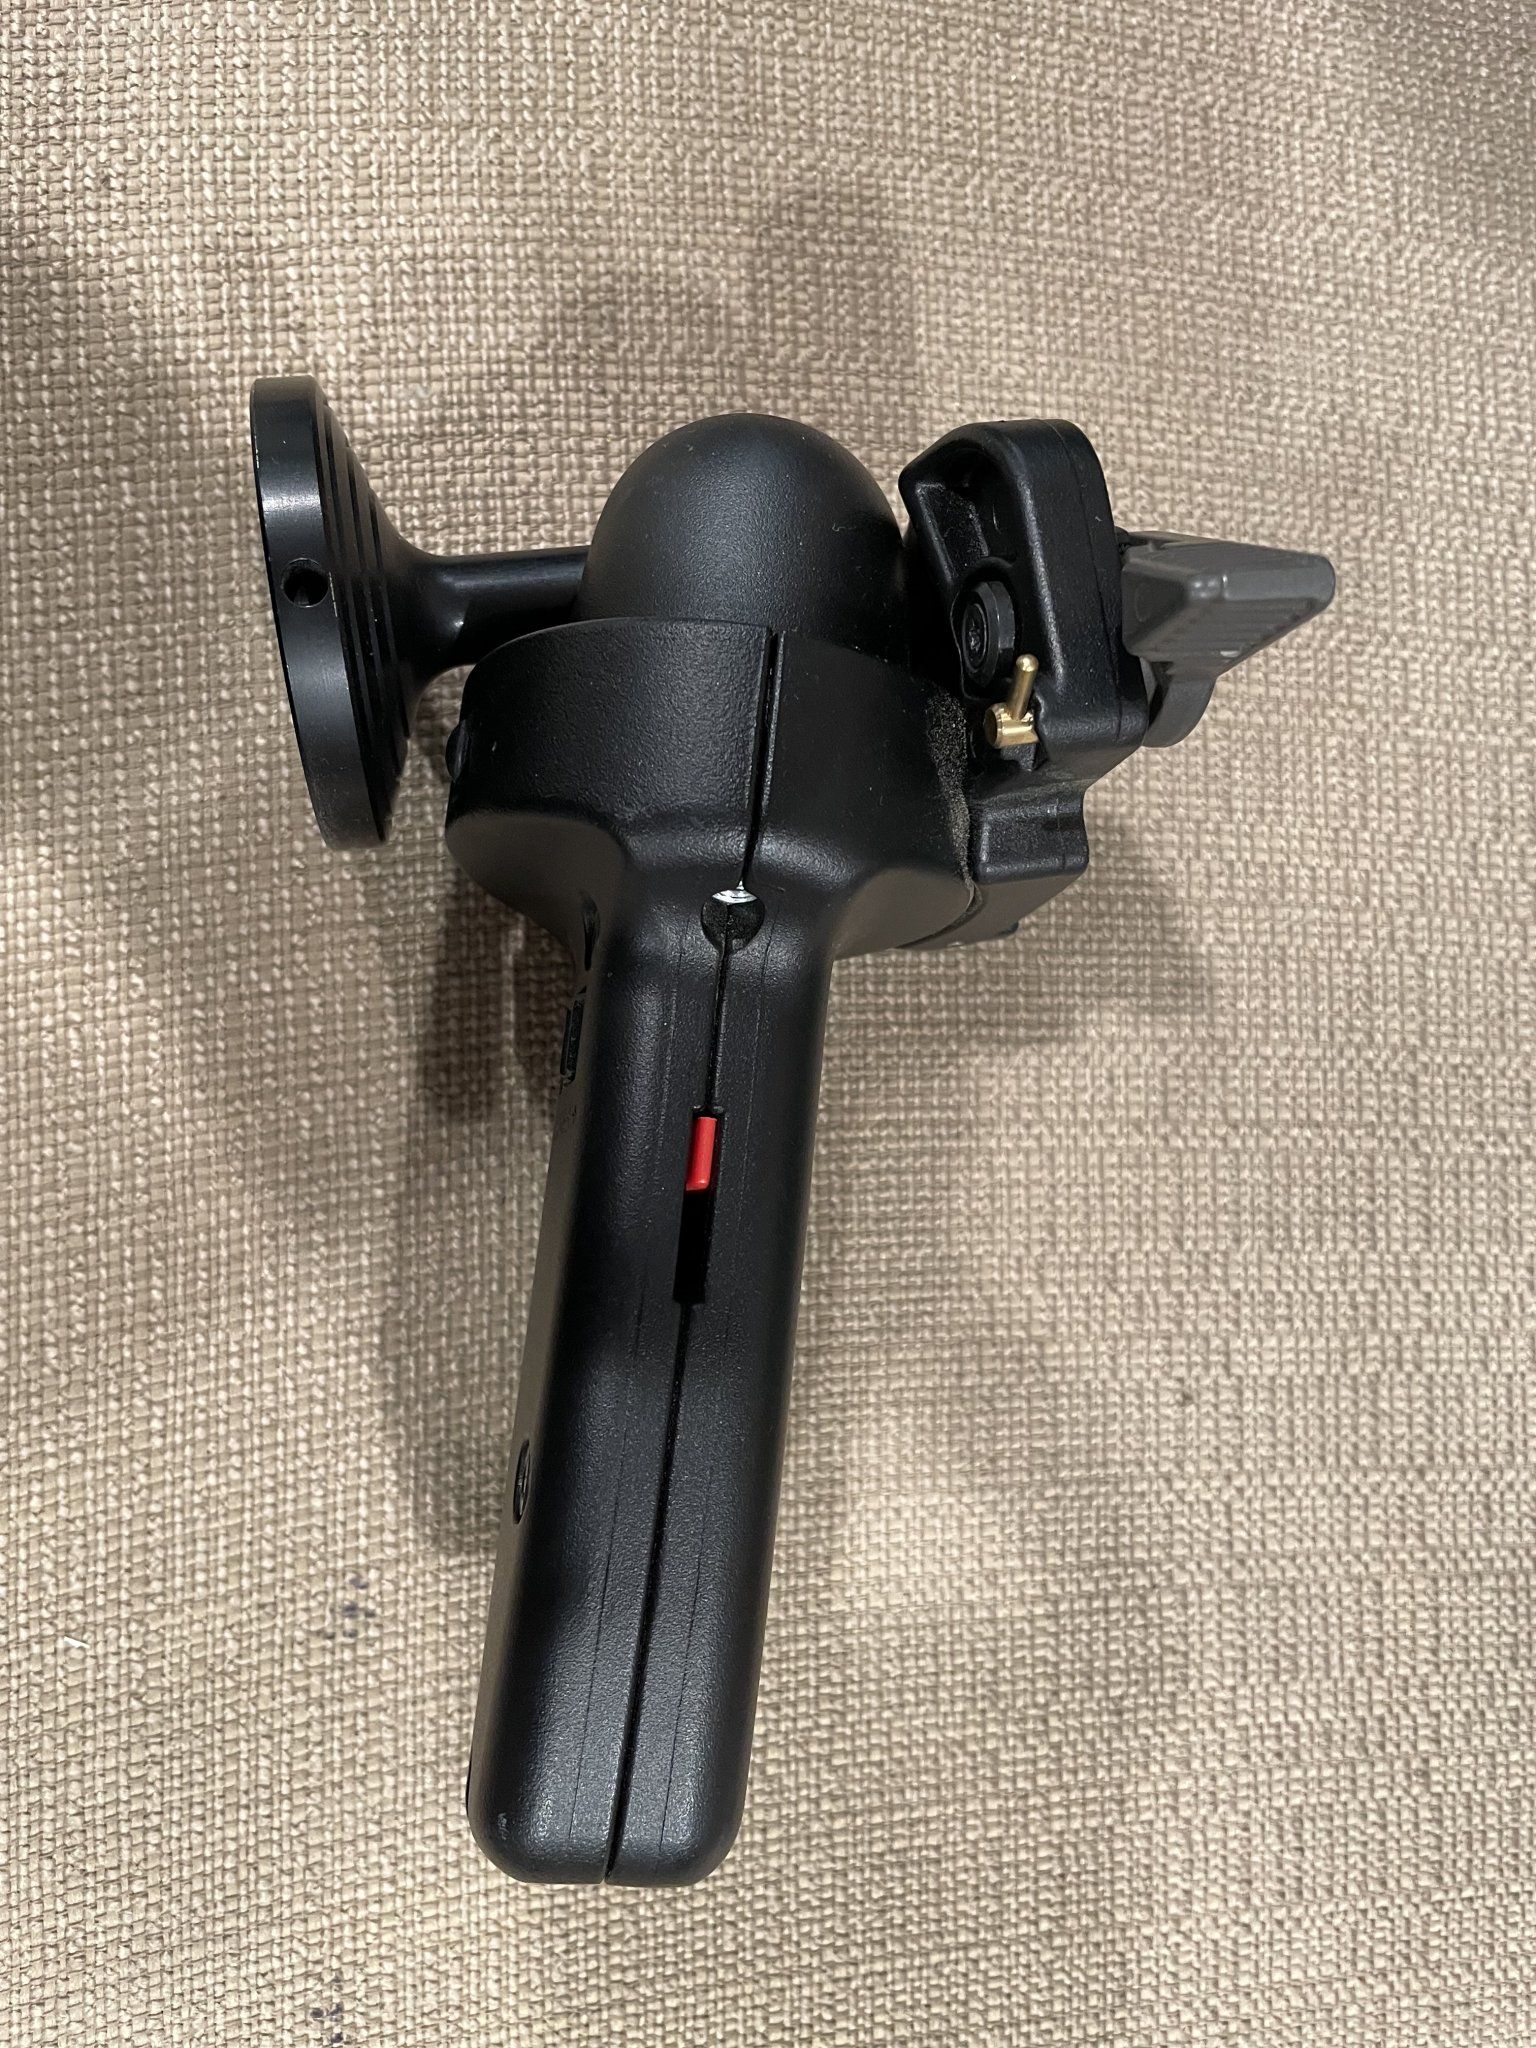 Manfrotto Side.jpg